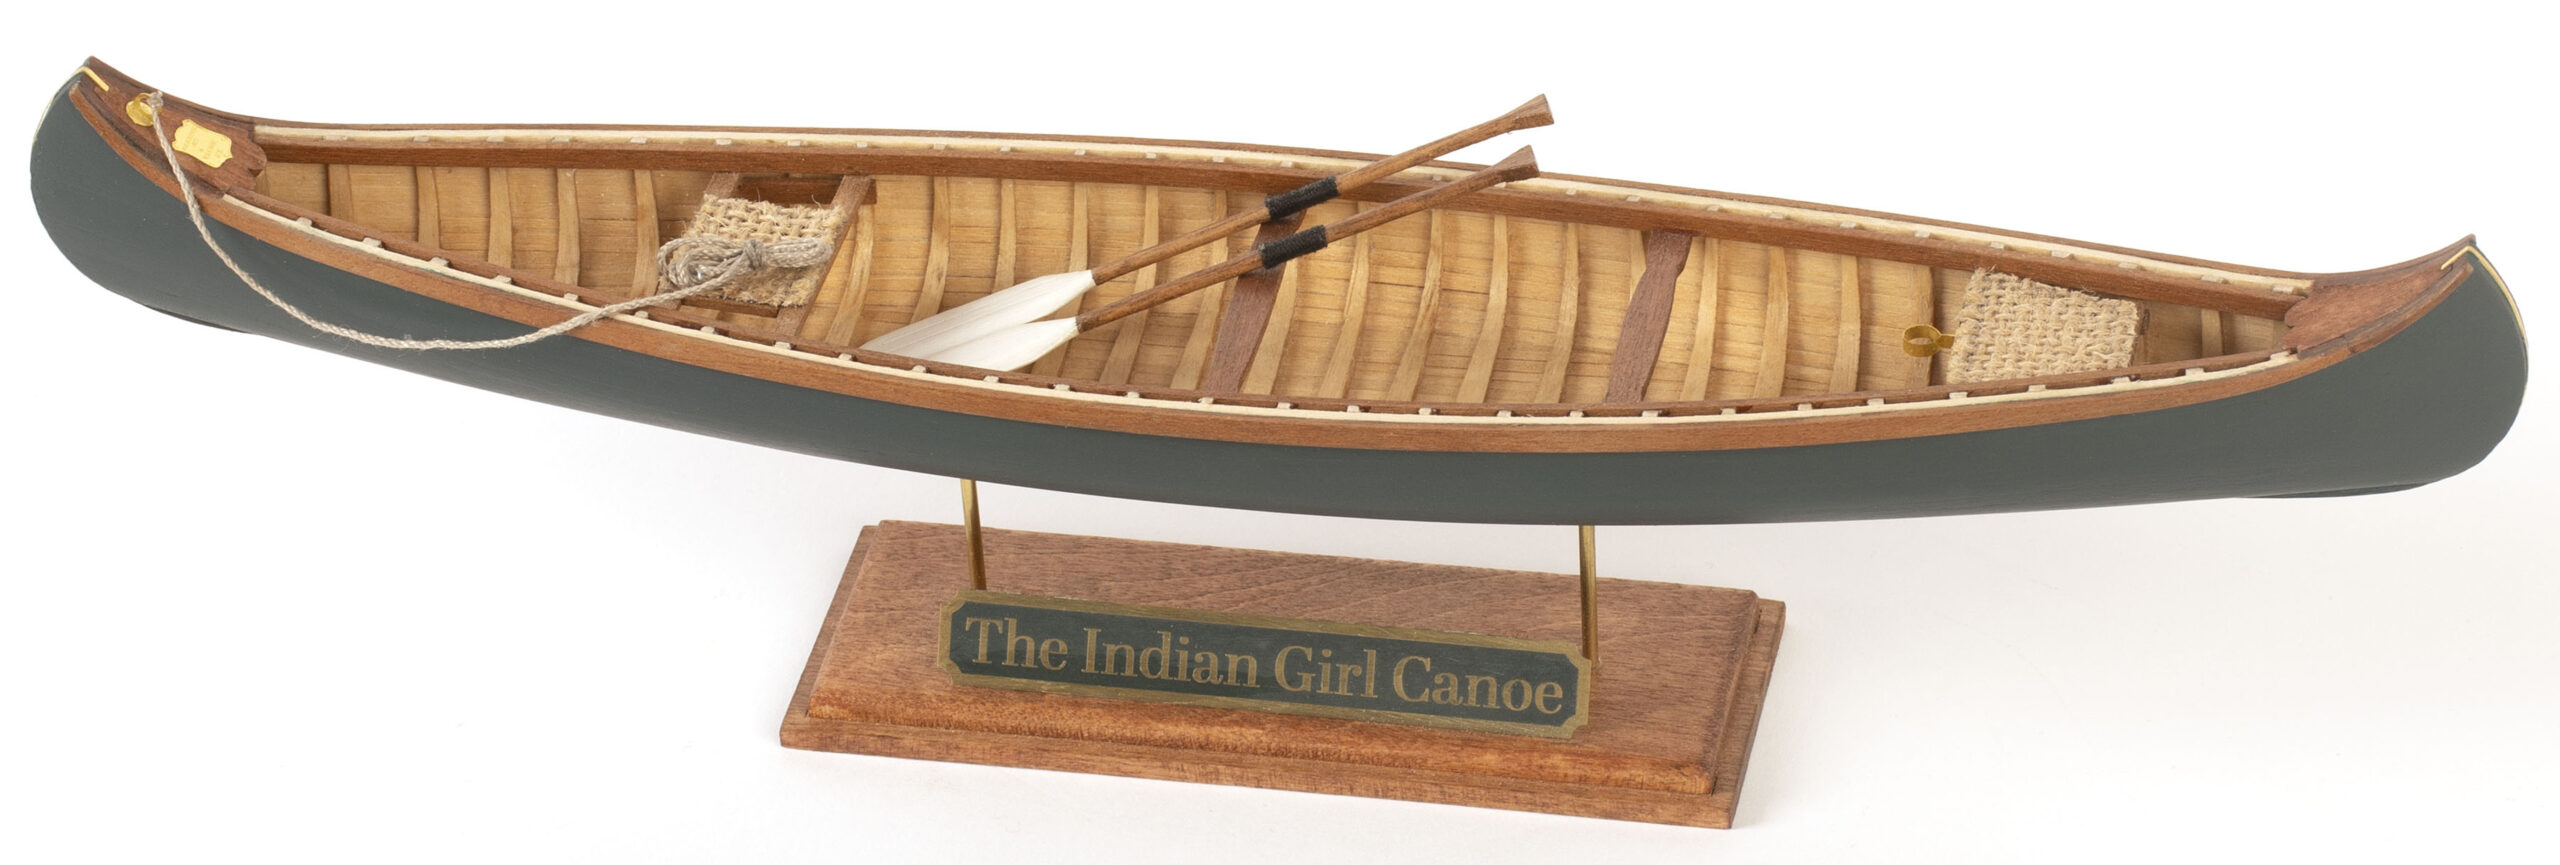 Indian Girl Canoe Model (19000) at 1:16 Scale. Wooden Ship Model Kit for Beginners by Artesanía Latina.